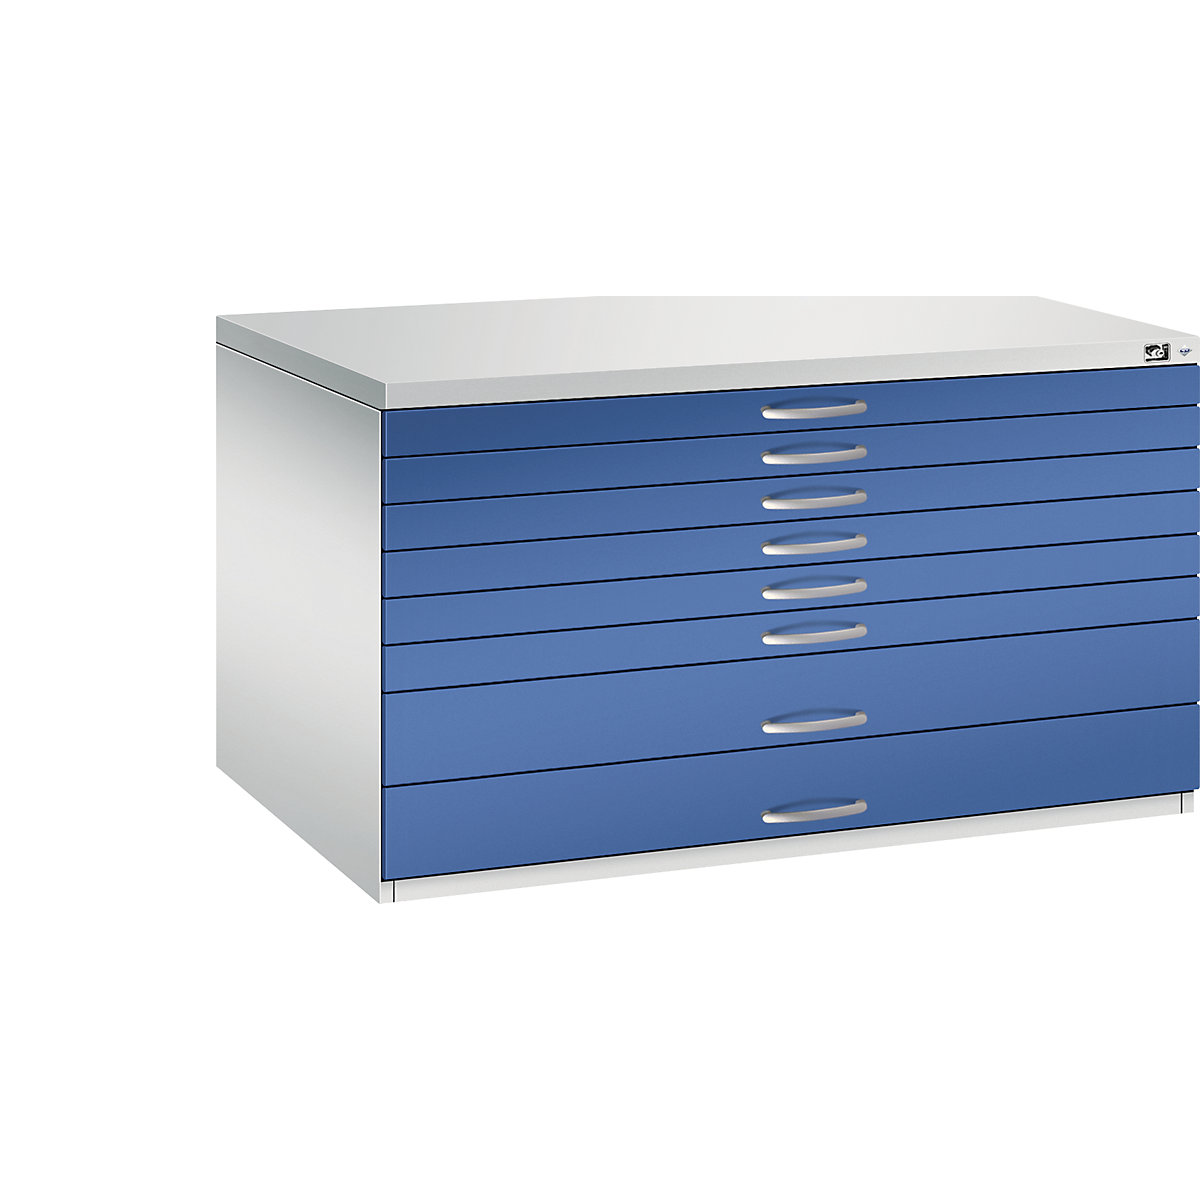 Drawing cabinet – C+P, A0, 8 drawers, height 760 mm, light grey / gentian blue-15